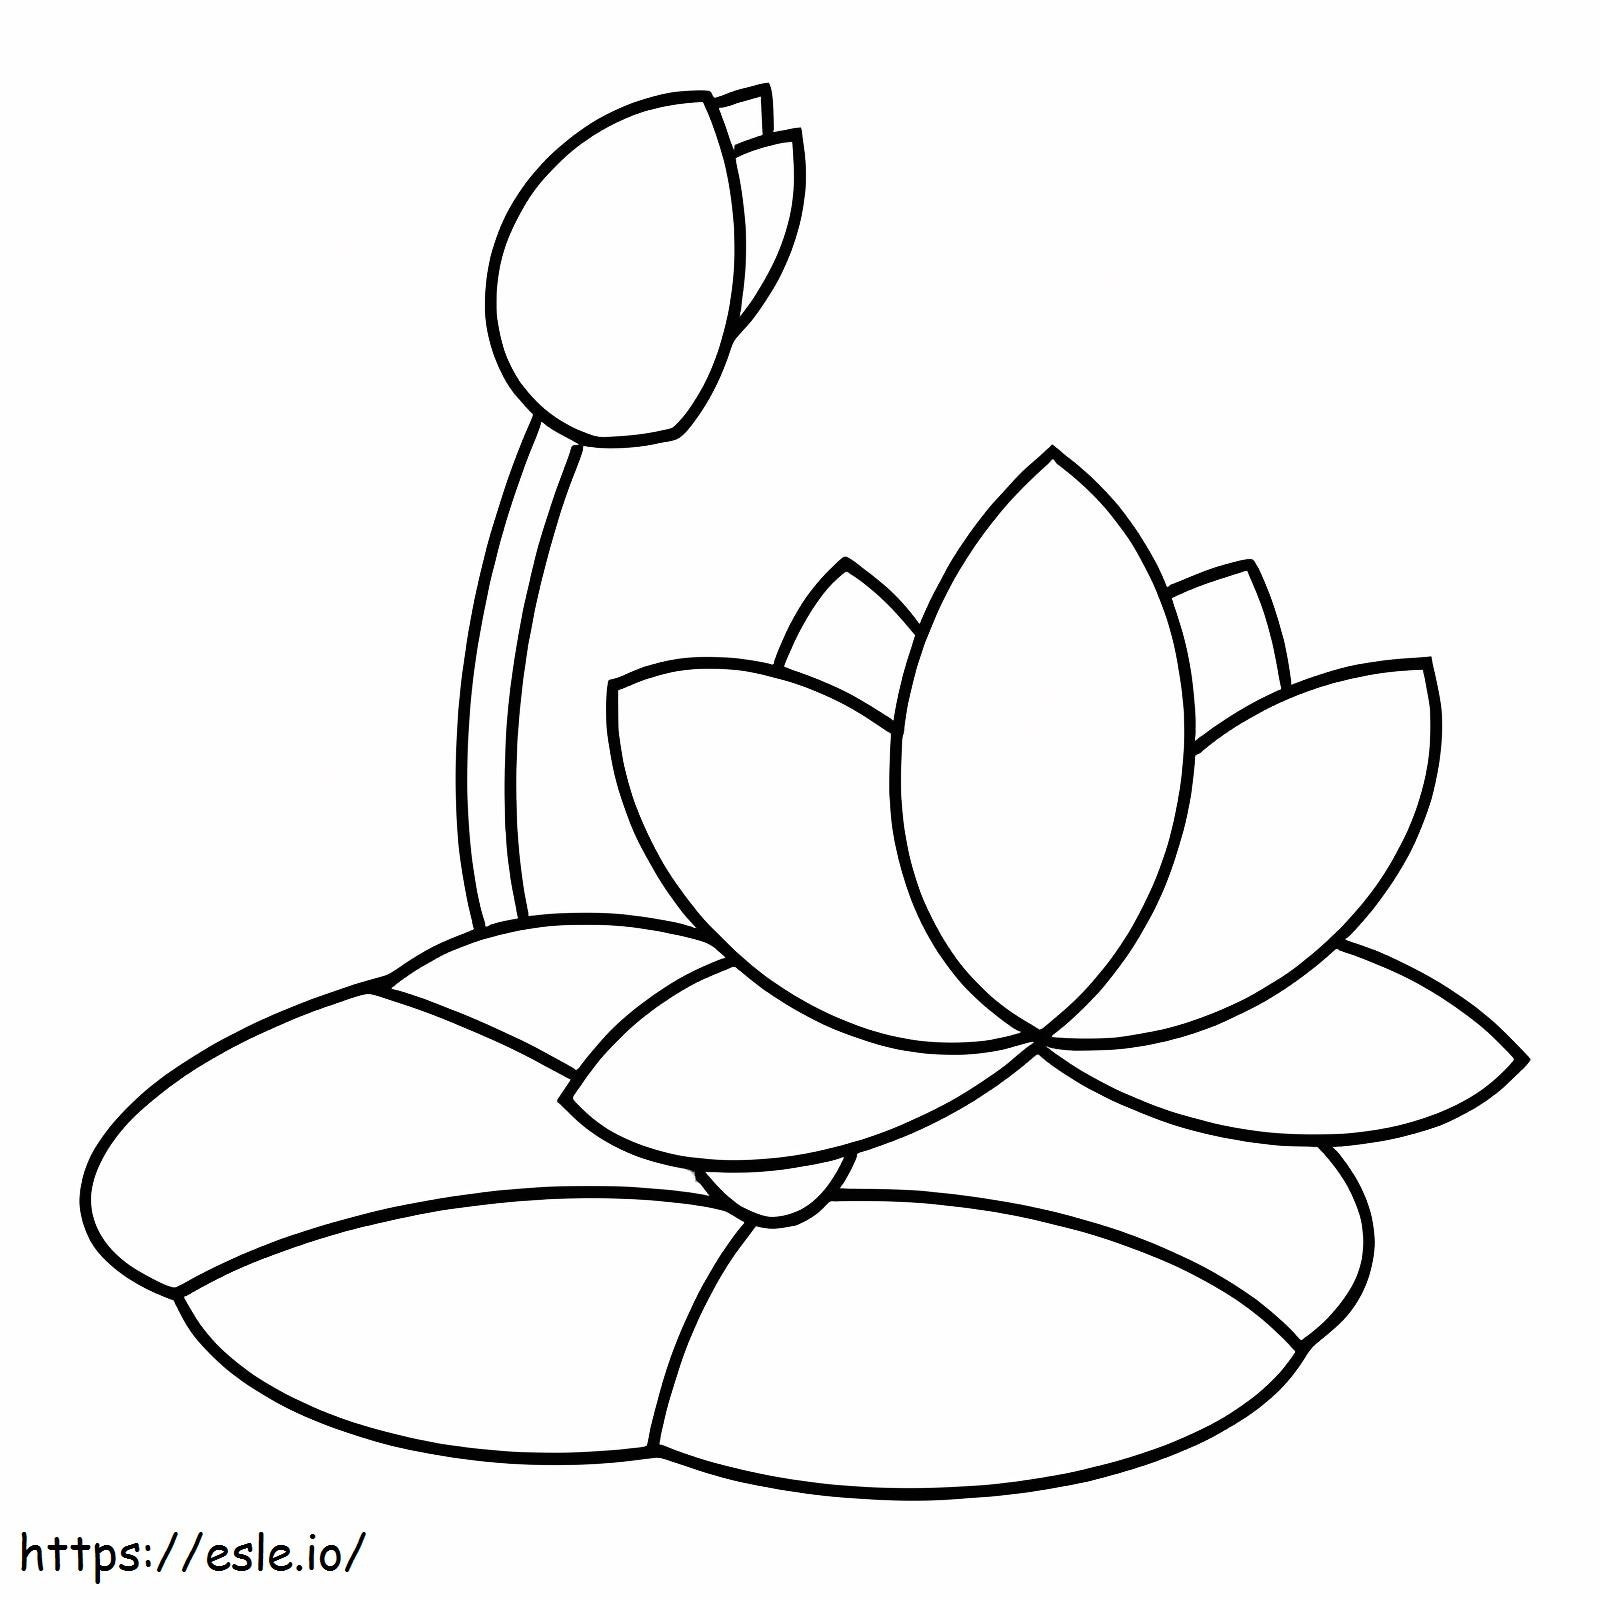 Easy Lotto coloring page